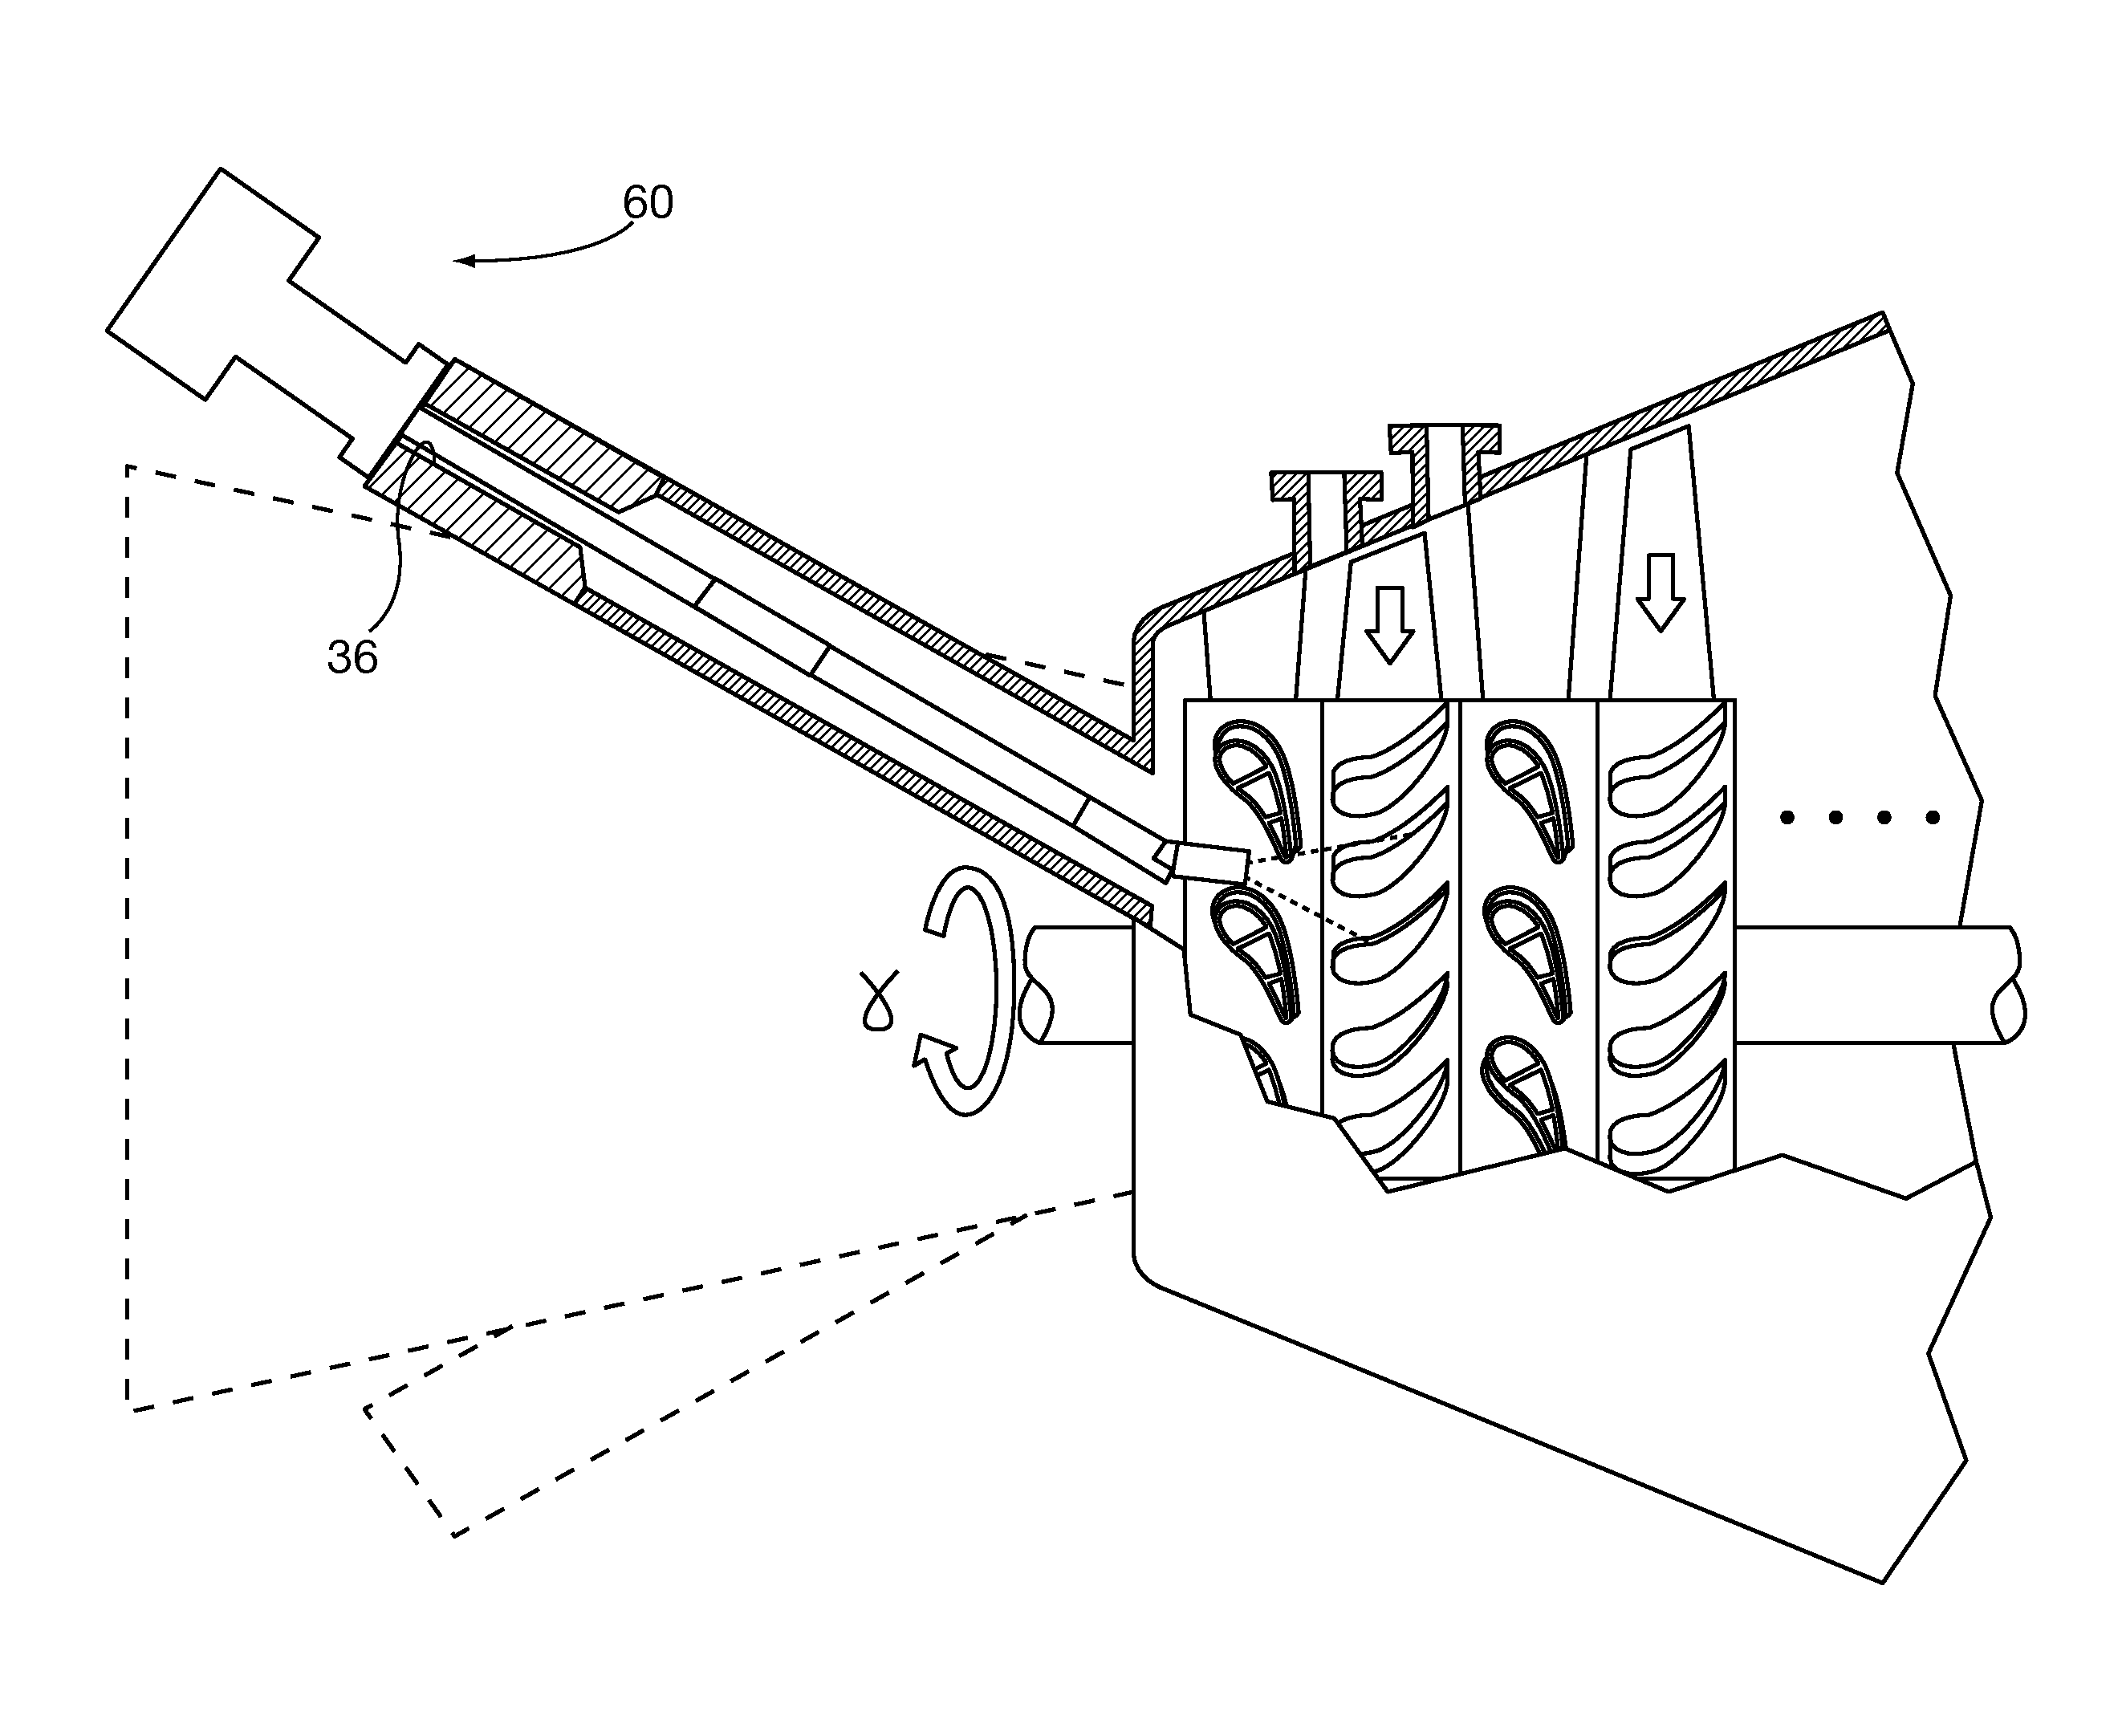 System and method for automated optical inspection of industrial gas turbines and other power generation machinery with articulated multi-axis inspection scope